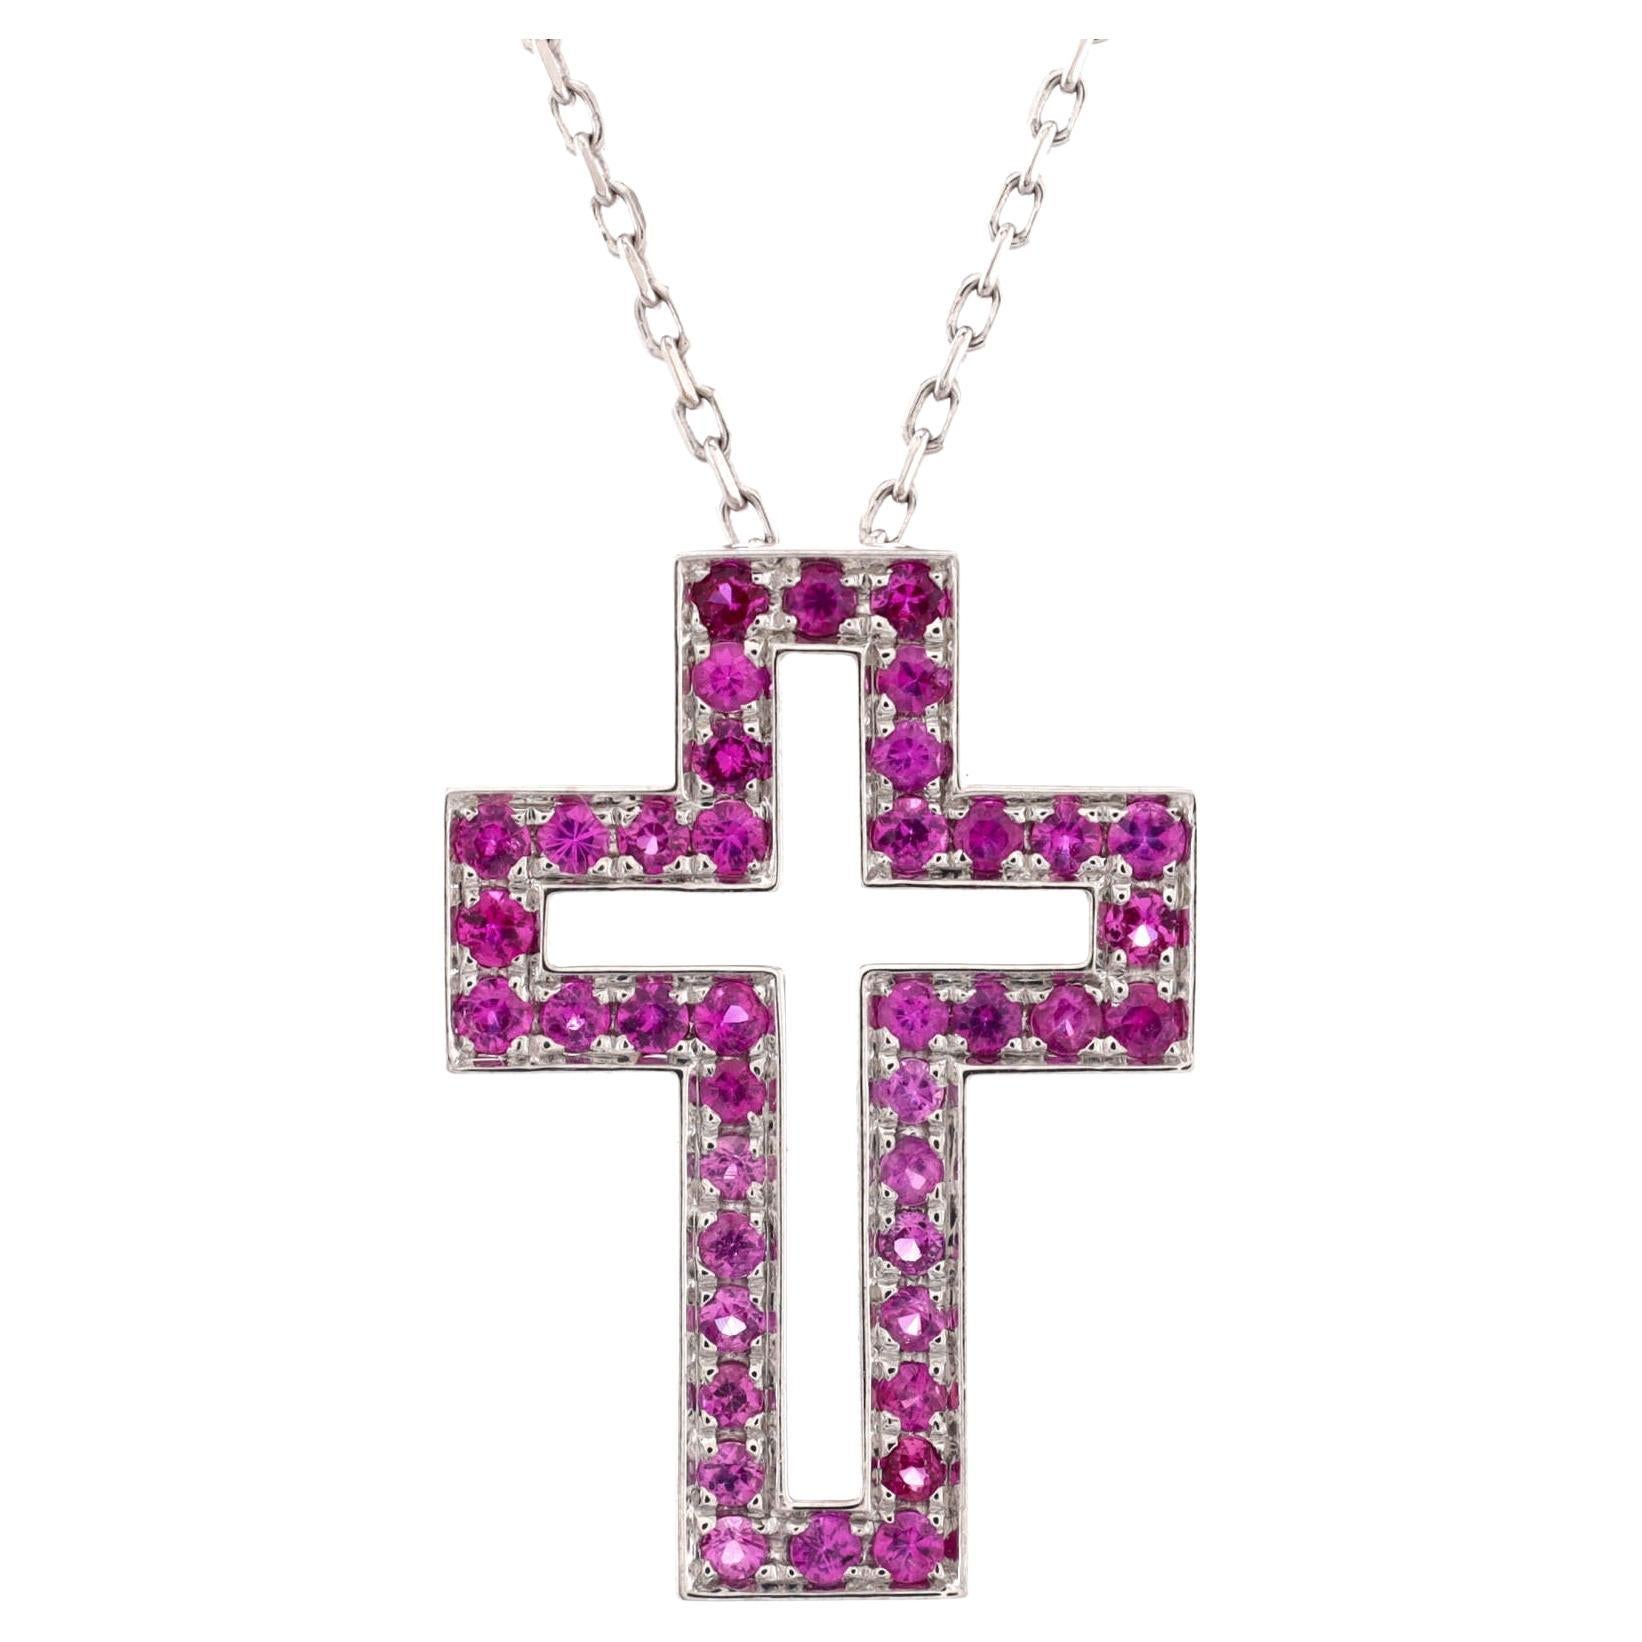 Boucheron Cross Pendant Necklace 18k White Gold with Pink Sapphires